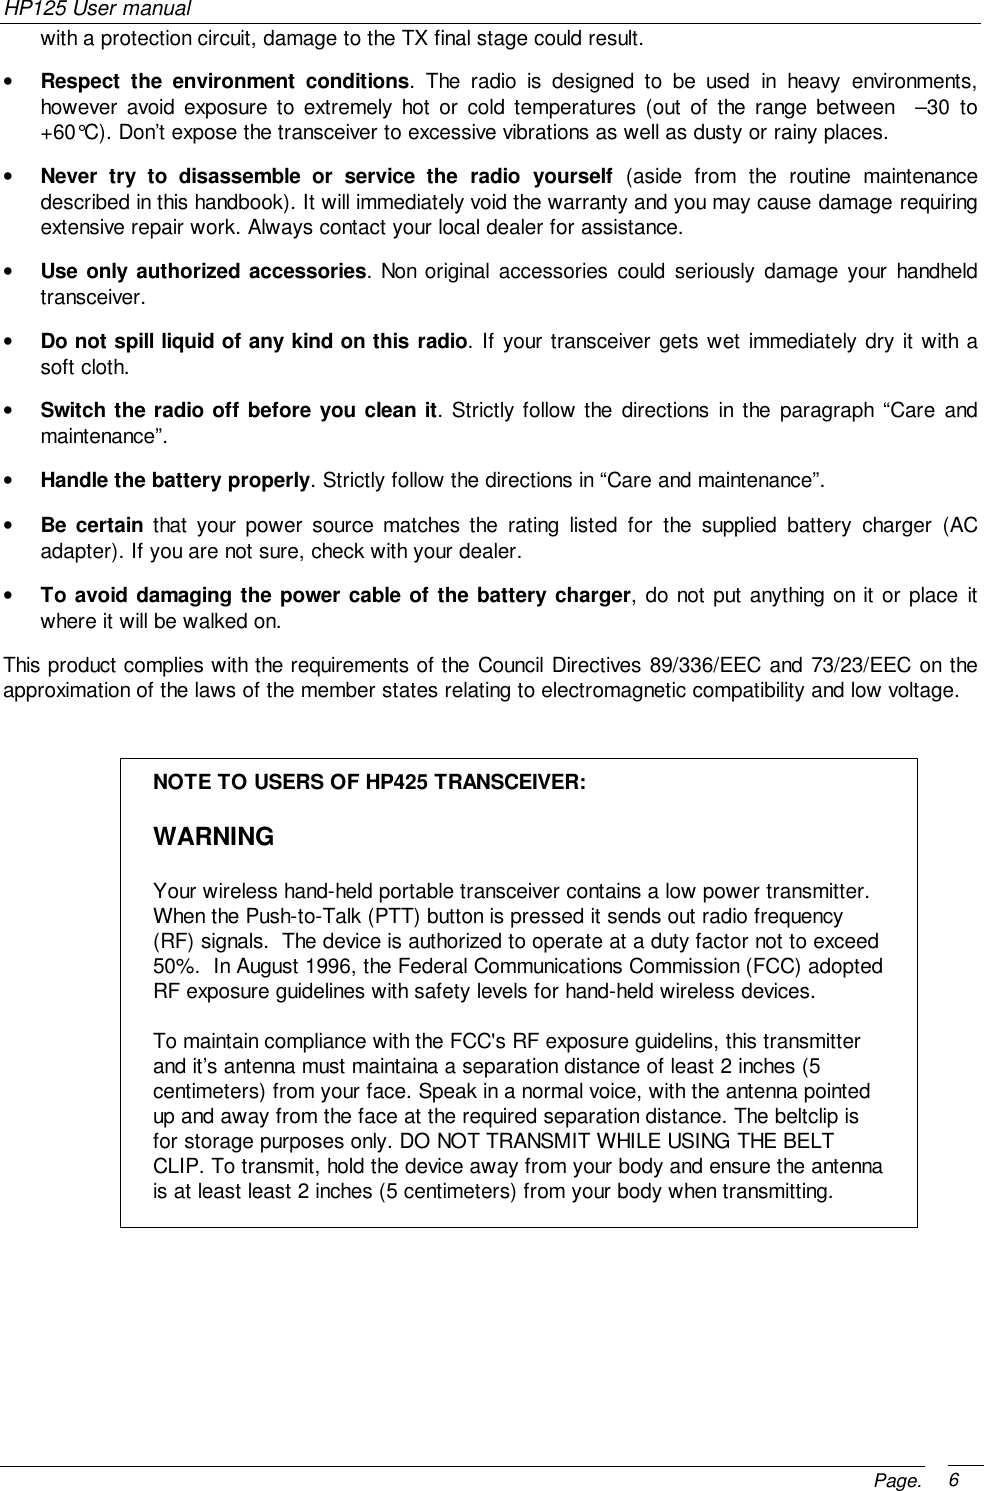 HP125 User manualPage. 6with a protection circuit, damage to the TX final stage could result.• Respect the environment conditions. The radio is designed to be used in heavy environments,however avoid exposure to extremely hot or cold temperatures (out of the range between  –30 to+60°C). Don’t expose the transceiver to excessive vibrations as well as dusty or rainy places.• Never try to disassemble or service the radio yourself (aside from the routine maintenancedescribed in this handbook). It will immediately void the warranty and you may cause damage requiringextensive repair work. Always contact your local dealer for assistance.• Use only authorized accessories. Non original accessories could seriously damage your handheldtransceiver.• Do not spill liquid of any kind on this radio. If your transceiver gets wet immediately dry it with asoft cloth.• Switch the radio off before you clean it. Strictly follow the directions in the paragraph “Care andmaintenance”.• Handle the battery properly. Strictly follow the directions in “Care and maintenance”.• Be certain that your power source matches the rating listed for the supplied battery charger (ACadapter). If you are not sure, check with your dealer.• To avoid damaging the power cable of the battery charger, do not put anything on it or place itwhere it will be walked on.This product complies with the requirements of the Council Directives 89/336/EEC and 73/23/EEC on theapproximation of the laws of the member states relating to electromagnetic compatibility and low voltage.NOTE TO USERS OF HP425 TRANSCEIVER:WARNINGYour wireless hand-held portable transceiver contains a low power transmitter.When the Push-to-Talk (PTT) button is pressed it sends out radio frequency(RF) signals.  The device is authorized to operate at a duty factor not to exceed50%.  In August 1996, the Federal Communications Commission (FCC) adoptedRF exposure guidelines with safety levels for hand-held wireless devices.To maintain compliance with the FCC&apos;s RF exposure guidelins, this transmitterand it’s antenna must maintaina a separation distance of least 2 inches (5centimeters) from your face. Speak in a normal voice, with the antenna pointedup and away from the face at the required separation distance. The beltclip isfor storage purposes only. DO NOT TRANSMIT WHILE USING THE BELTCLIP. To transmit, hold the device away from your body and ensure the antennais at least least 2 inches (5 centimeters) from your body when transmitting.